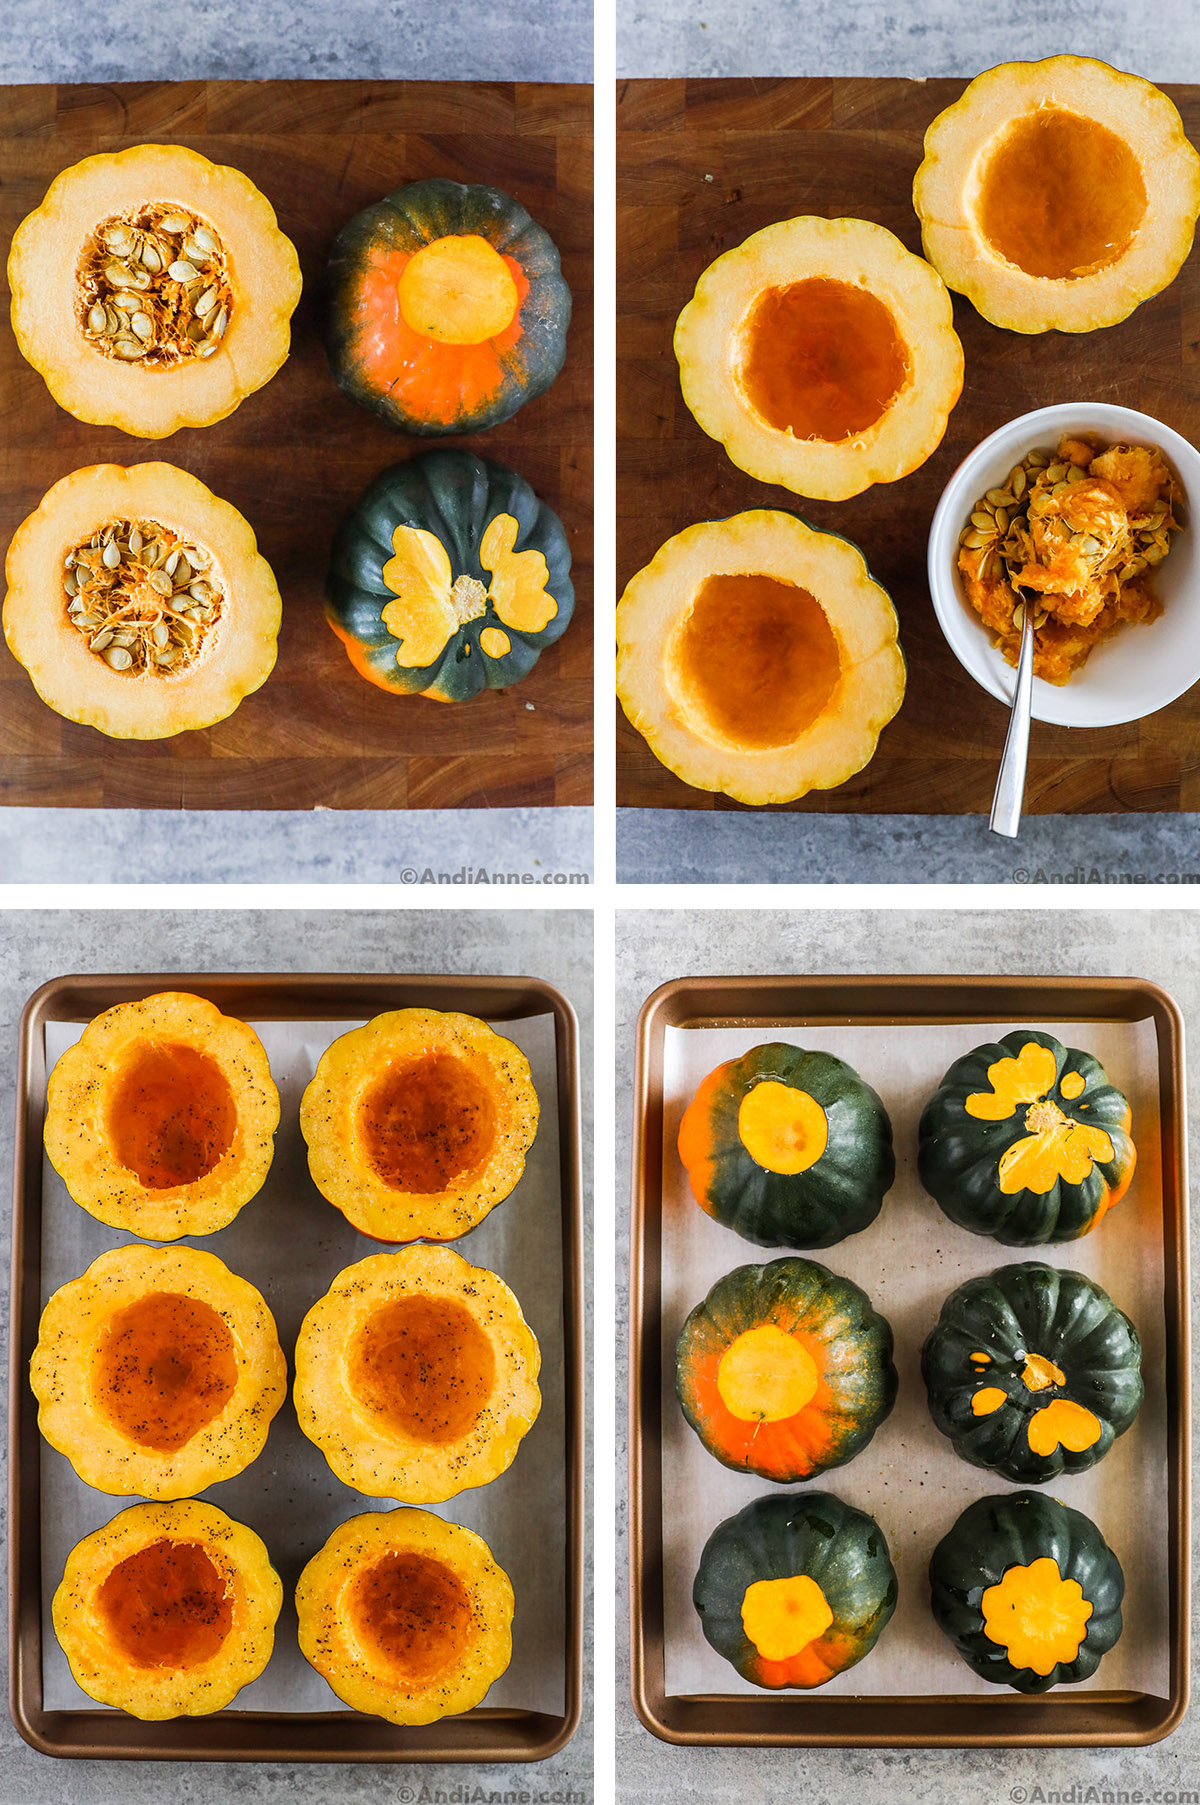 Four images of sliced acorn squash, first with seeds inside, second with seeds removed, third brushed with oil and seasoned with salt and pepper, fourth placed face down on baking sheet.